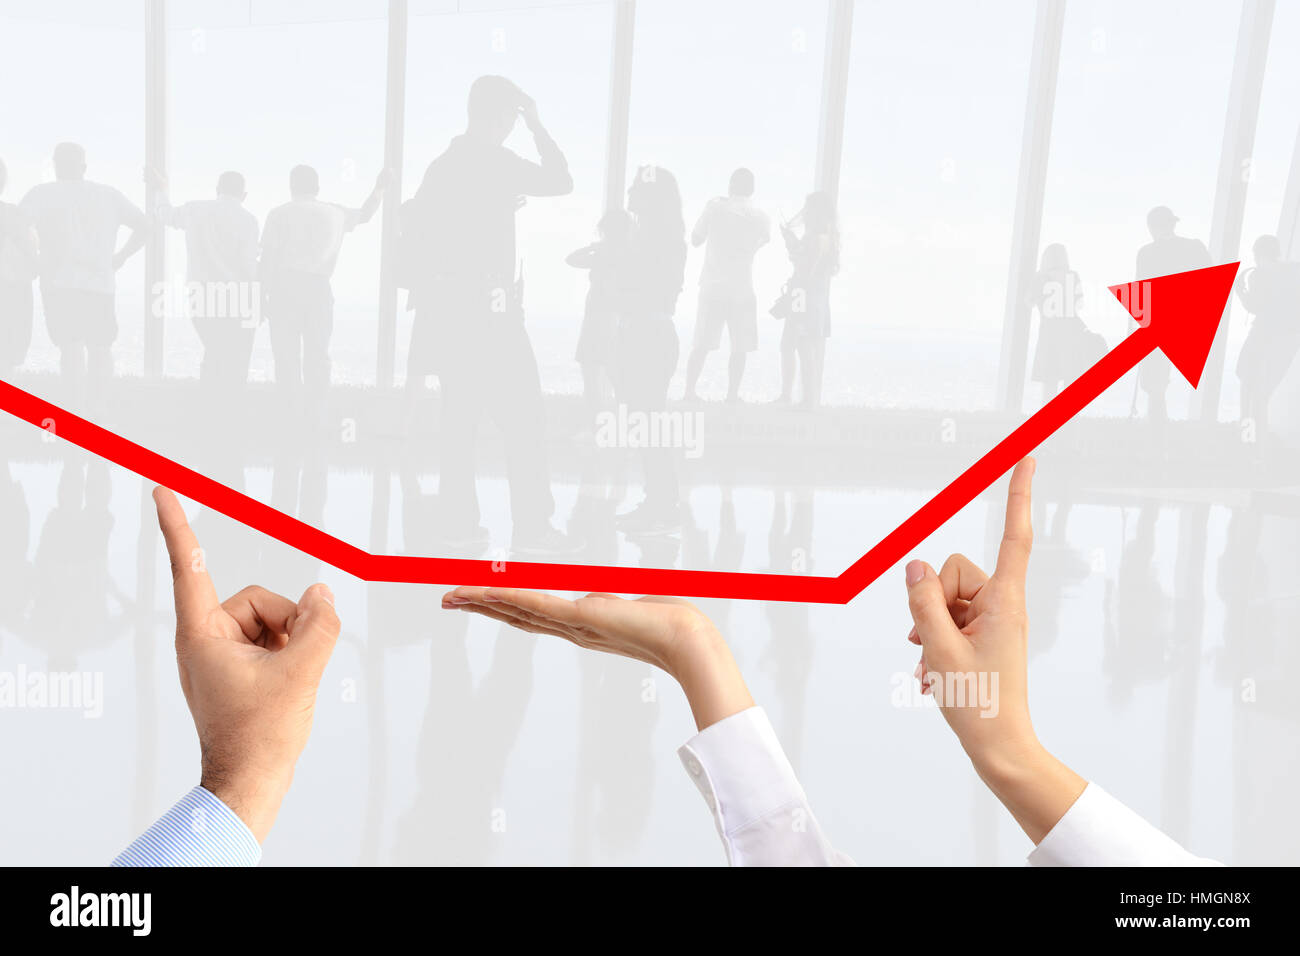 Teamwork concept with business people hands steering an arrow suggesting increase sales Stock Photo